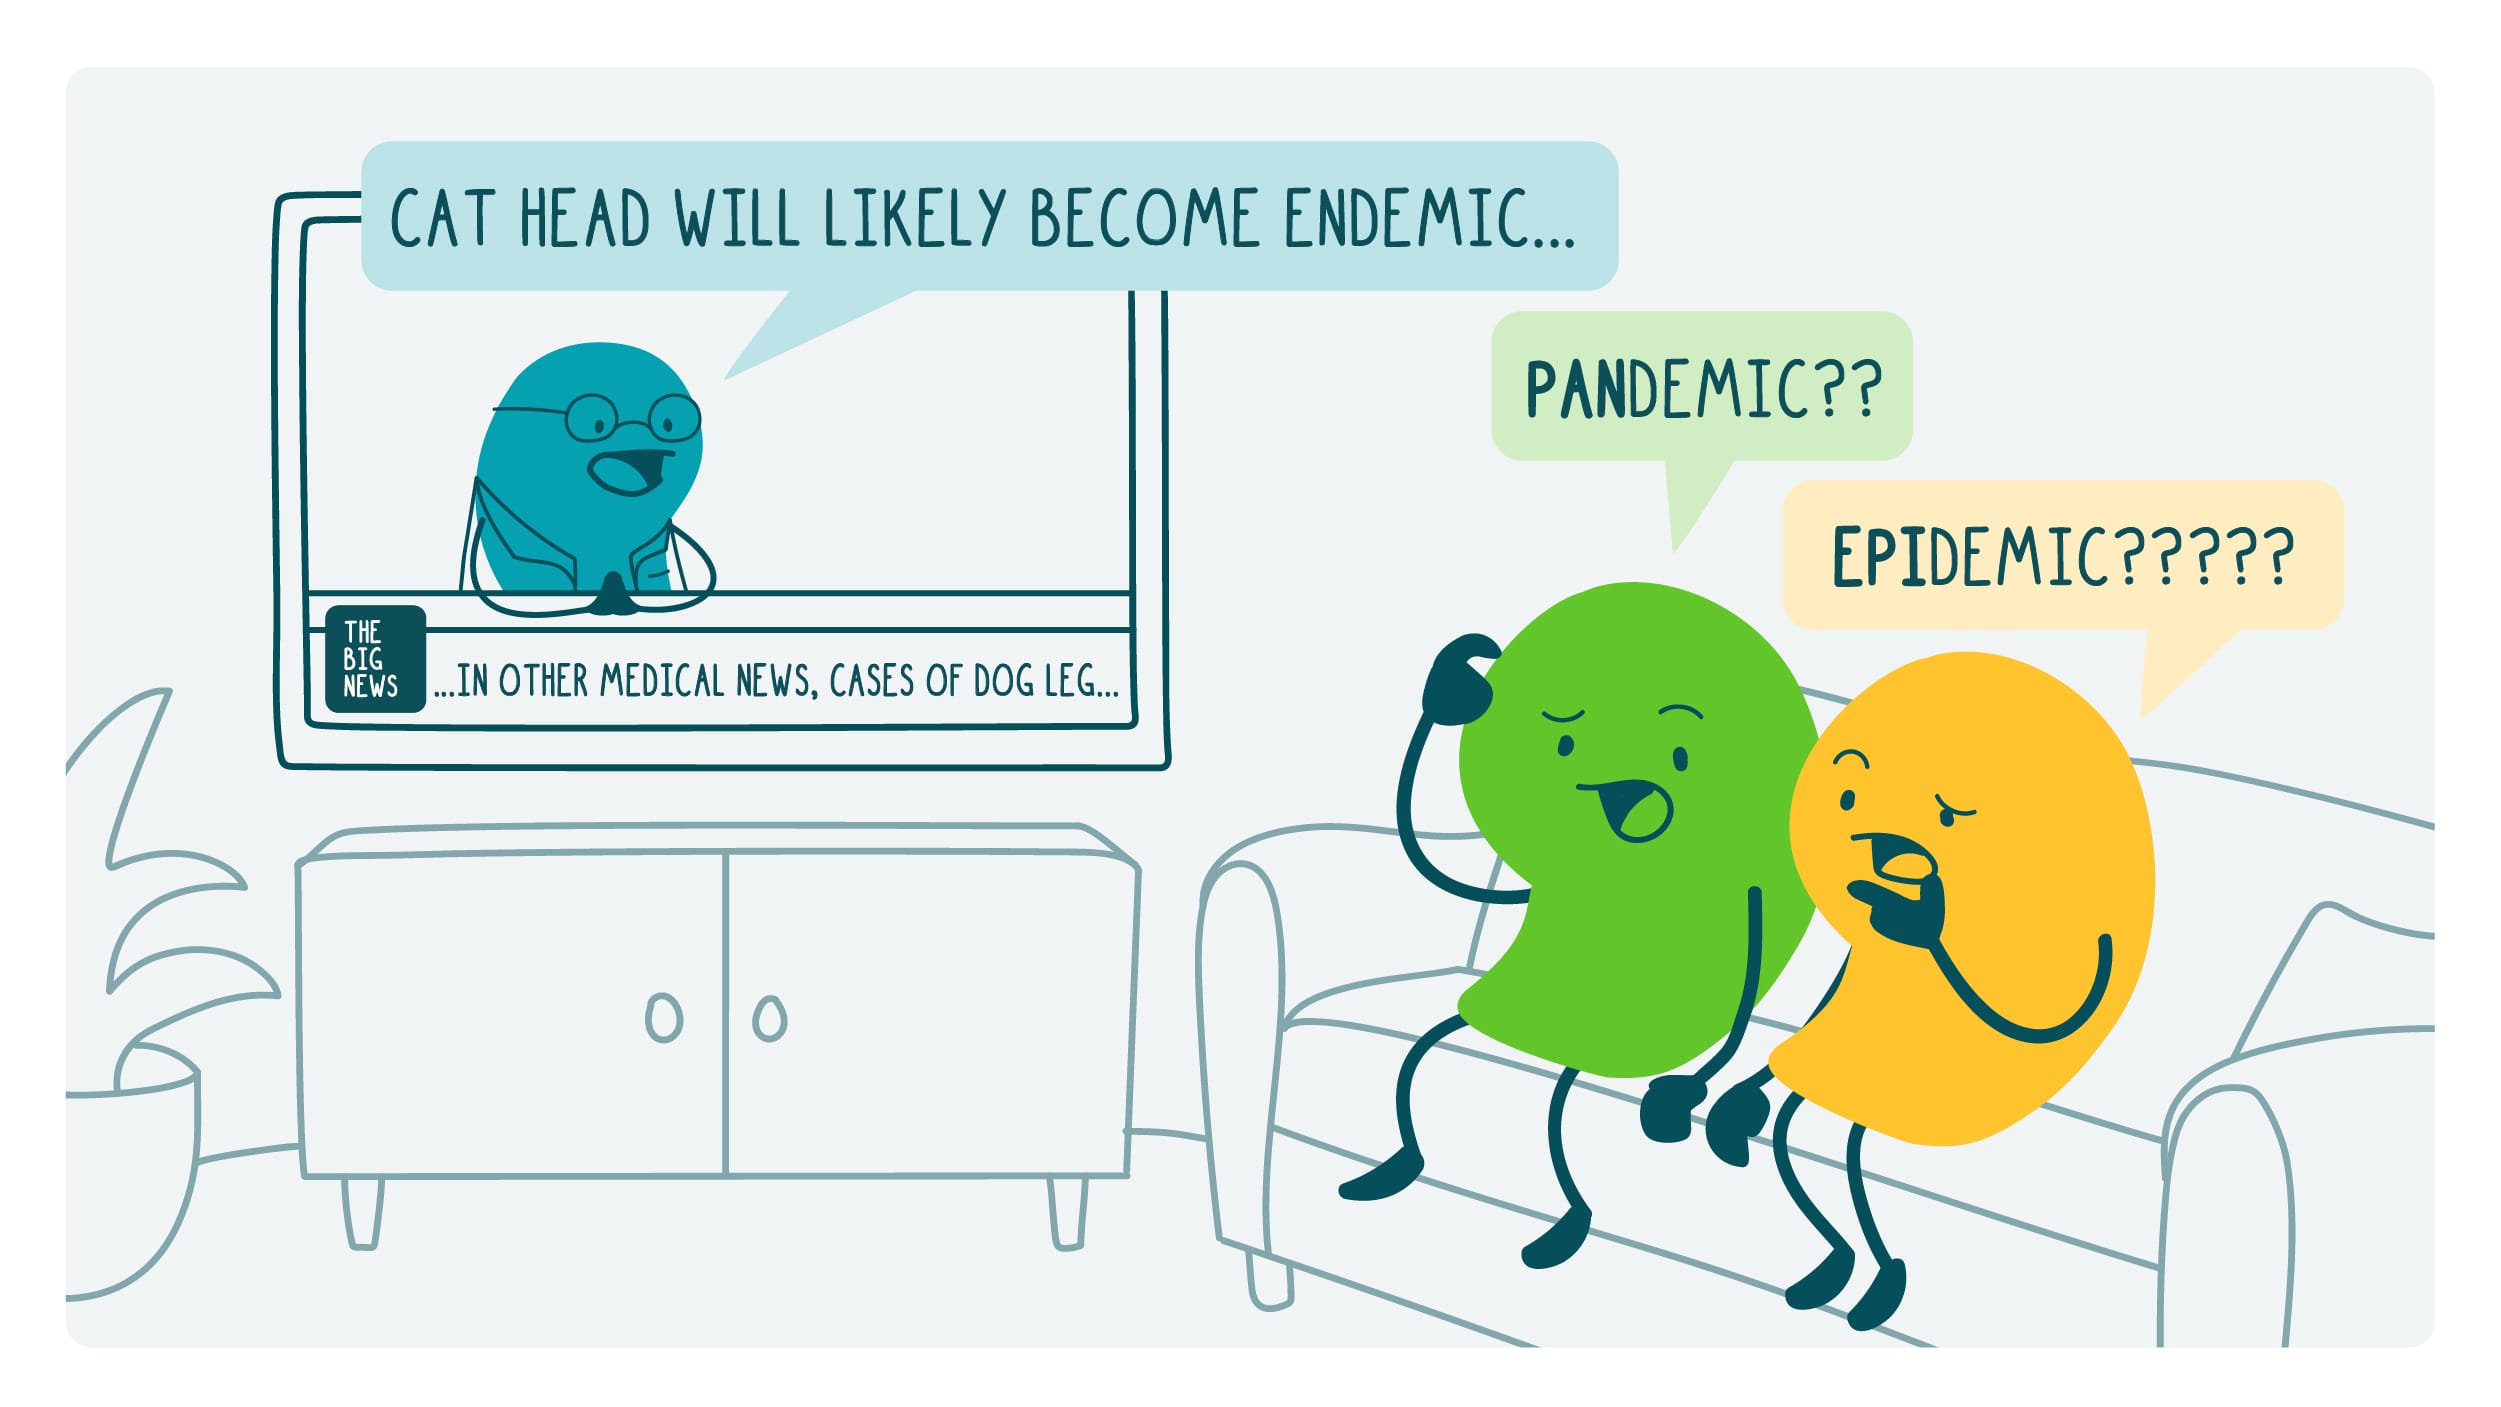 Two doodles sit on a couch watching the news. The newscaster says, “Cat head will likely become endemic.” The doodles are confused. One says, “Pandemic?” The other says, “Epidemic?”